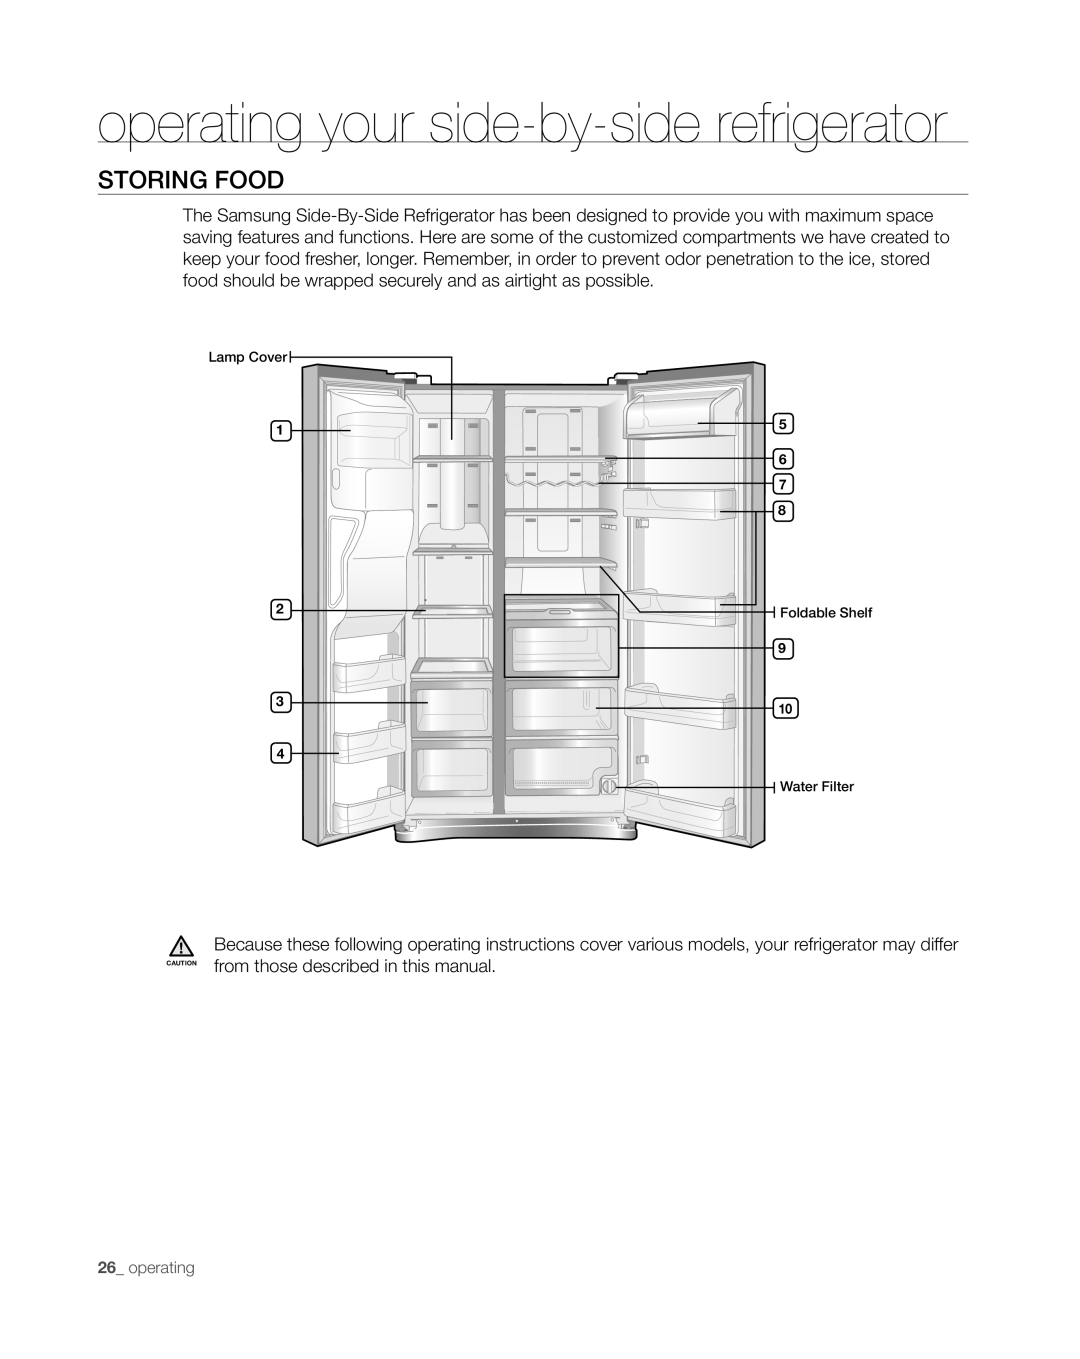 Samsung RS265TDWP, RS267TDWP user manual Storing Food, operating your side-by-side refrigerator 